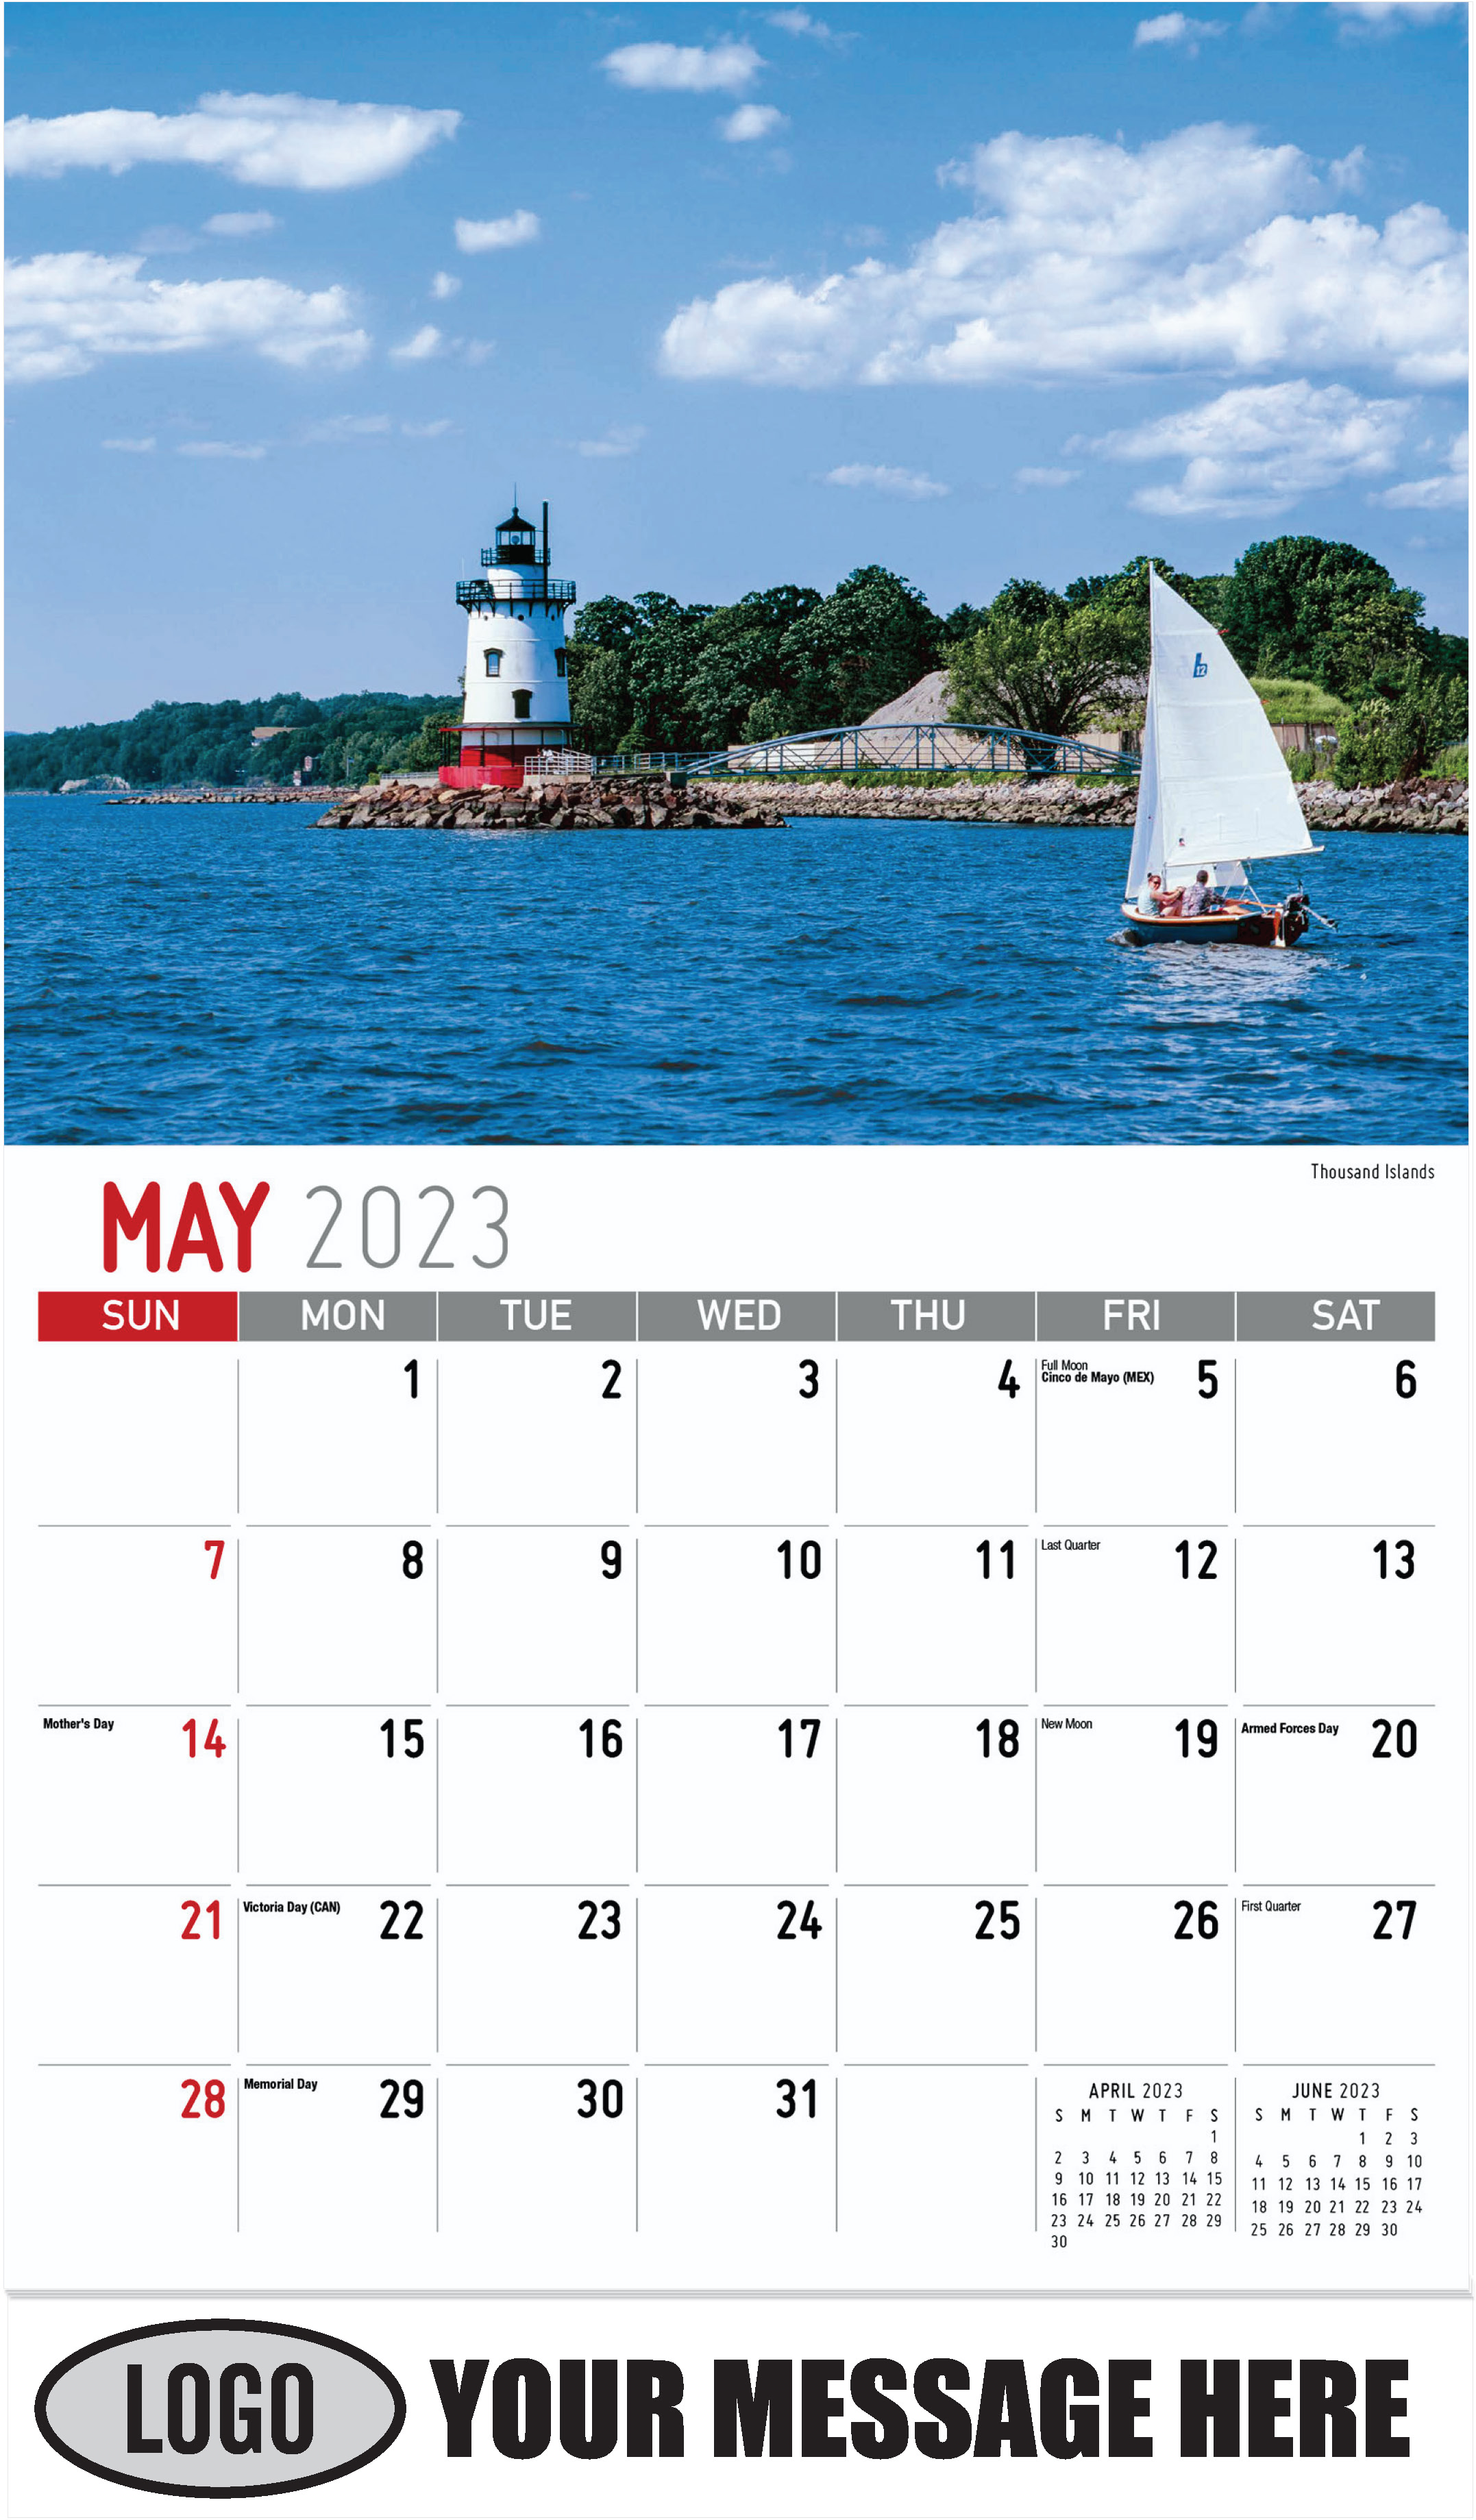 Thousand Islands - May - Scenes of New York 2023 Promotional Calendar